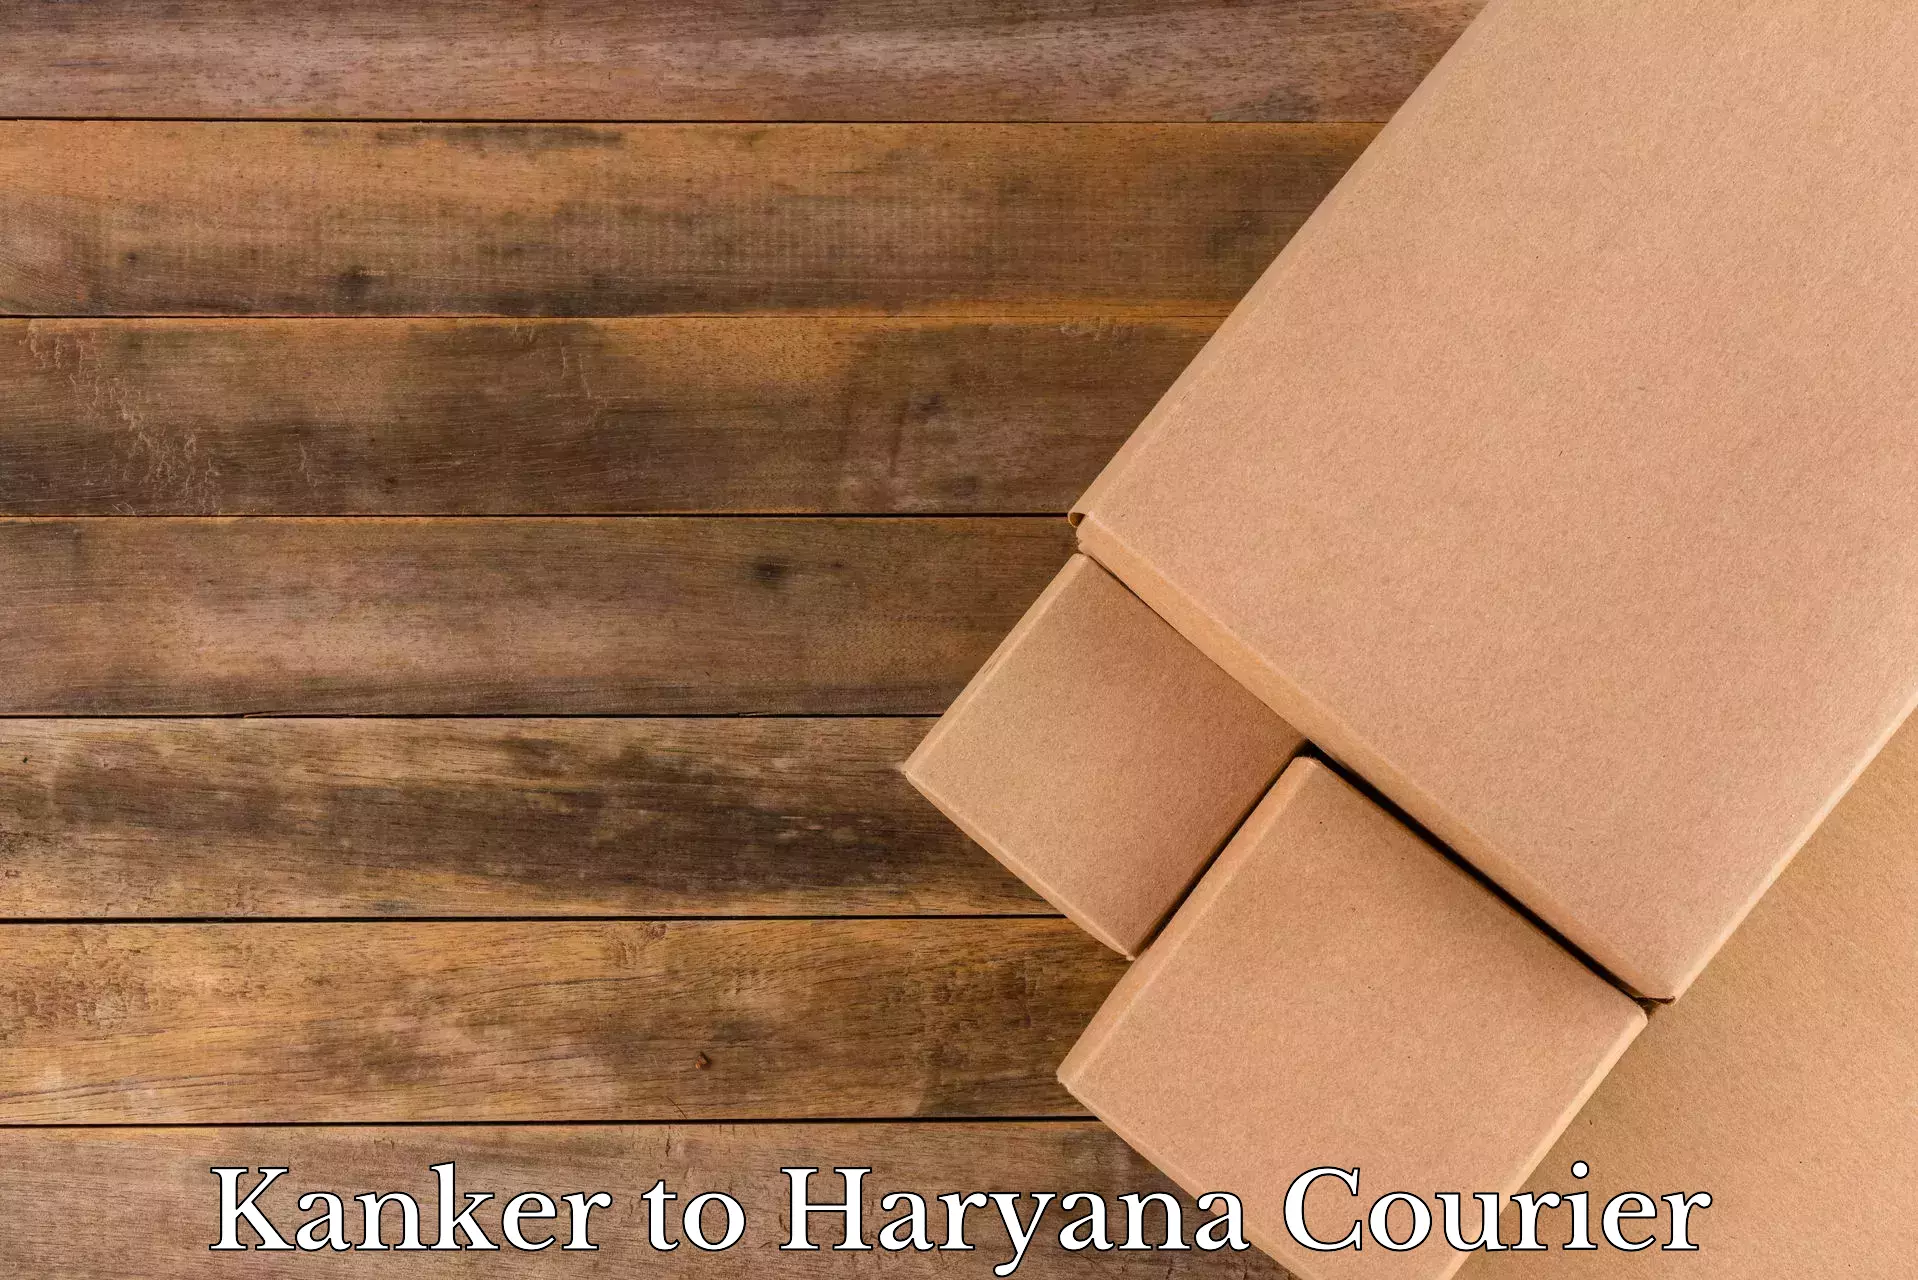 Full-service movers Kanker to Haryana